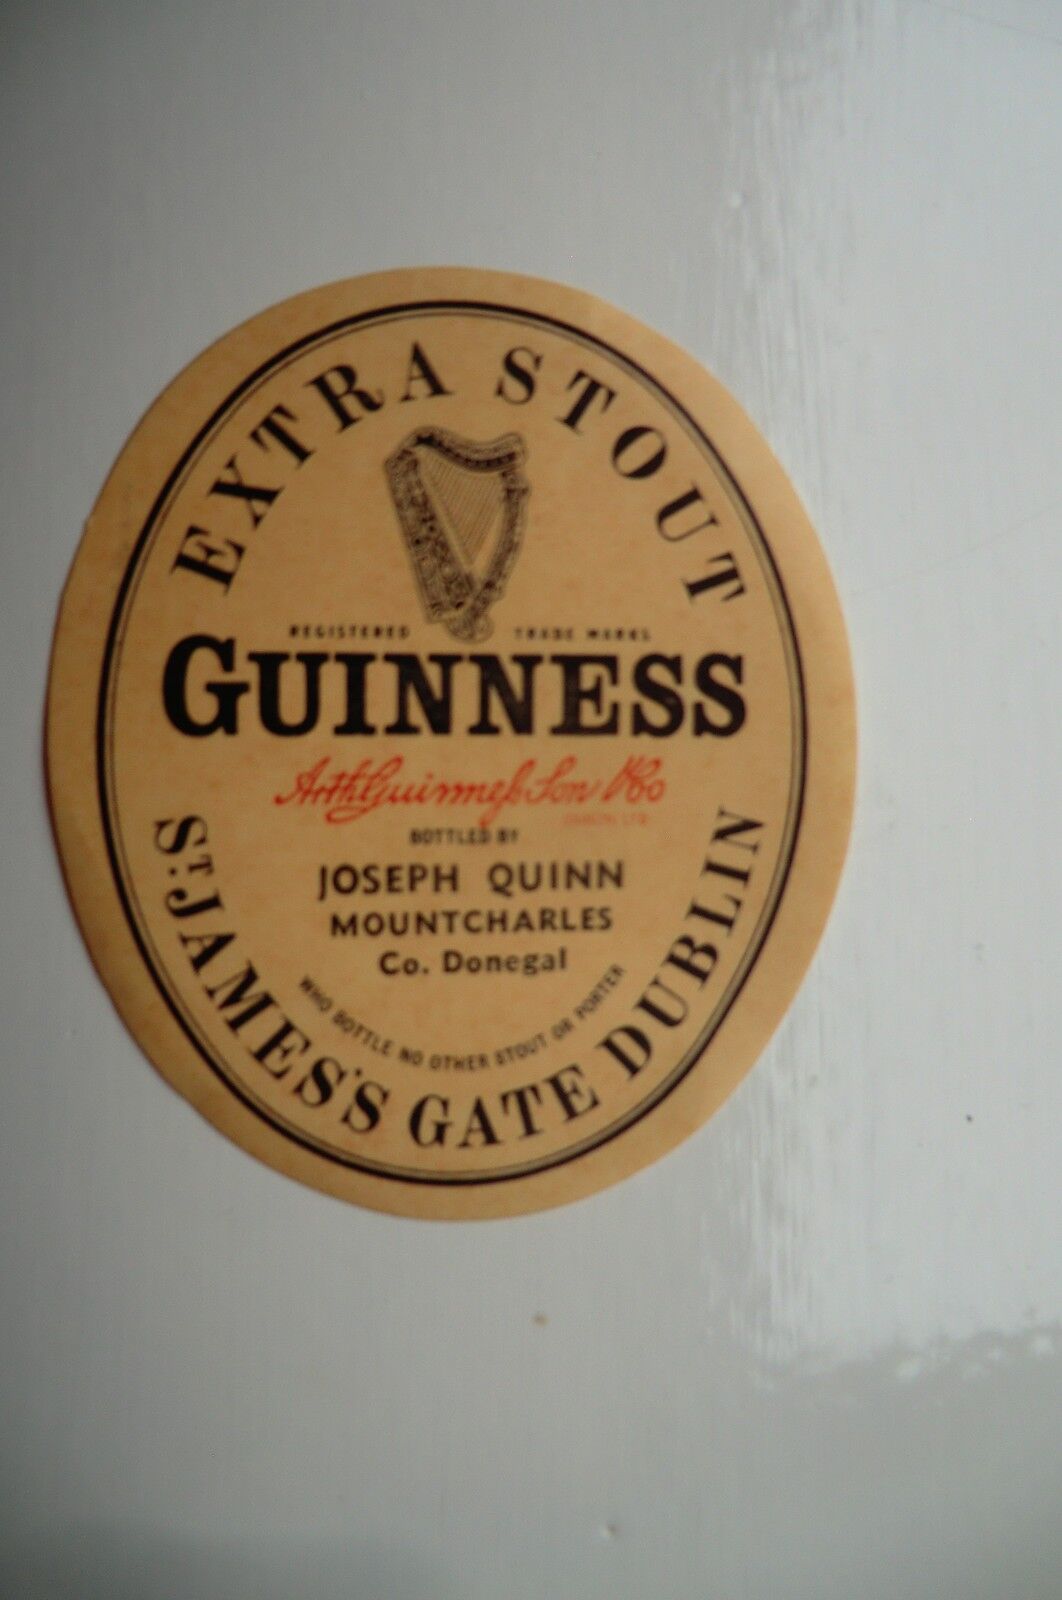 MINT GUINNESS EXTRA STOUT BOTTLE LABEL BOTTLED BY QUINN MOUNTCHARLES DONEGAL 